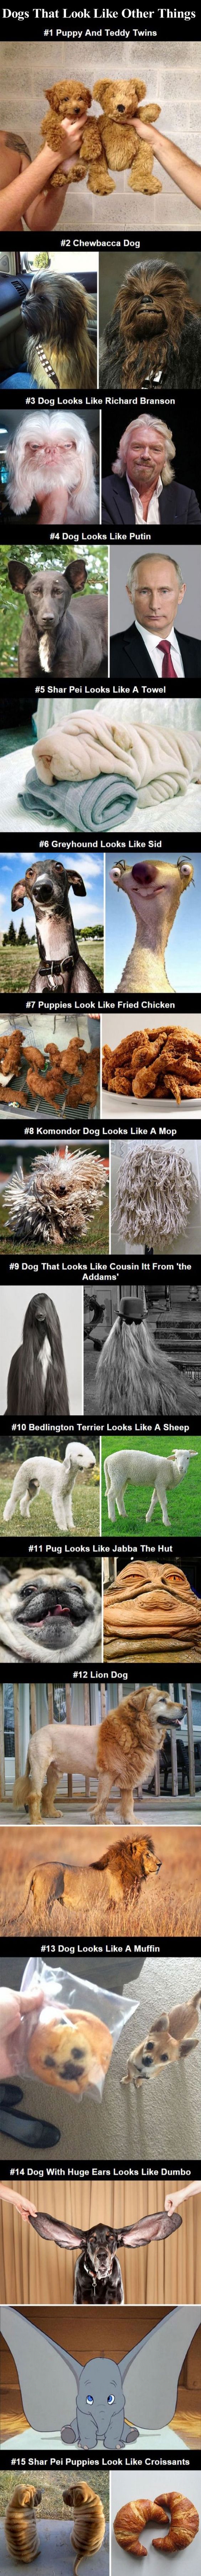 Dogs That Look Like Other Things cute animals dogs adorable dog puppy animal pets lol puppies humor funny pictures funny animals funny pets funny dogs